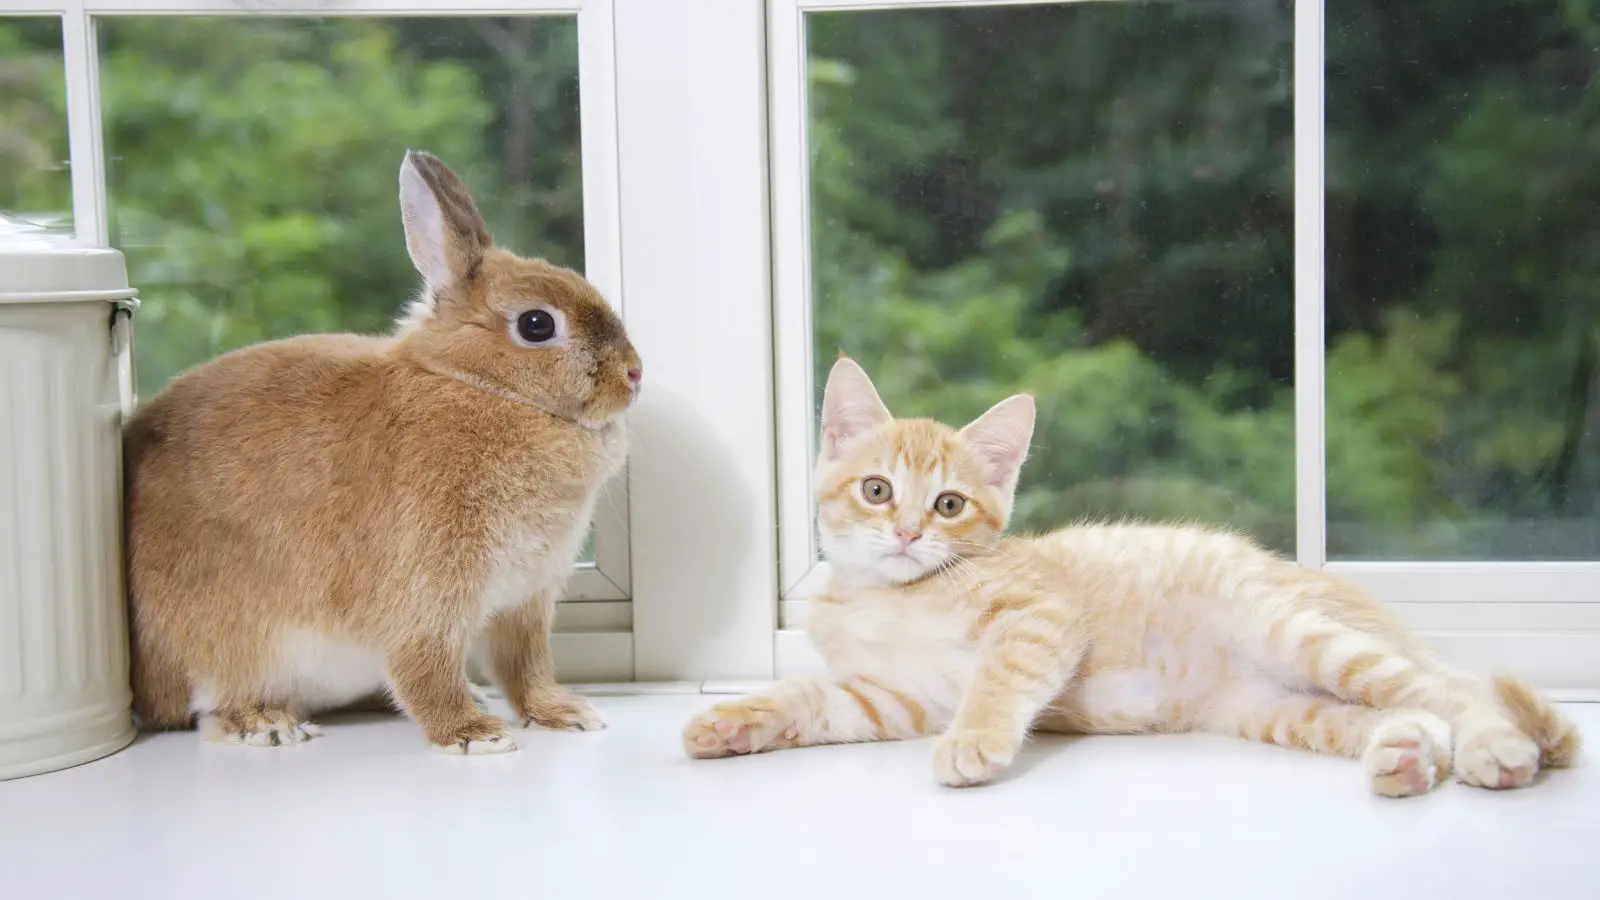 Rabbit and his cat friend - abouteverythingpets.com